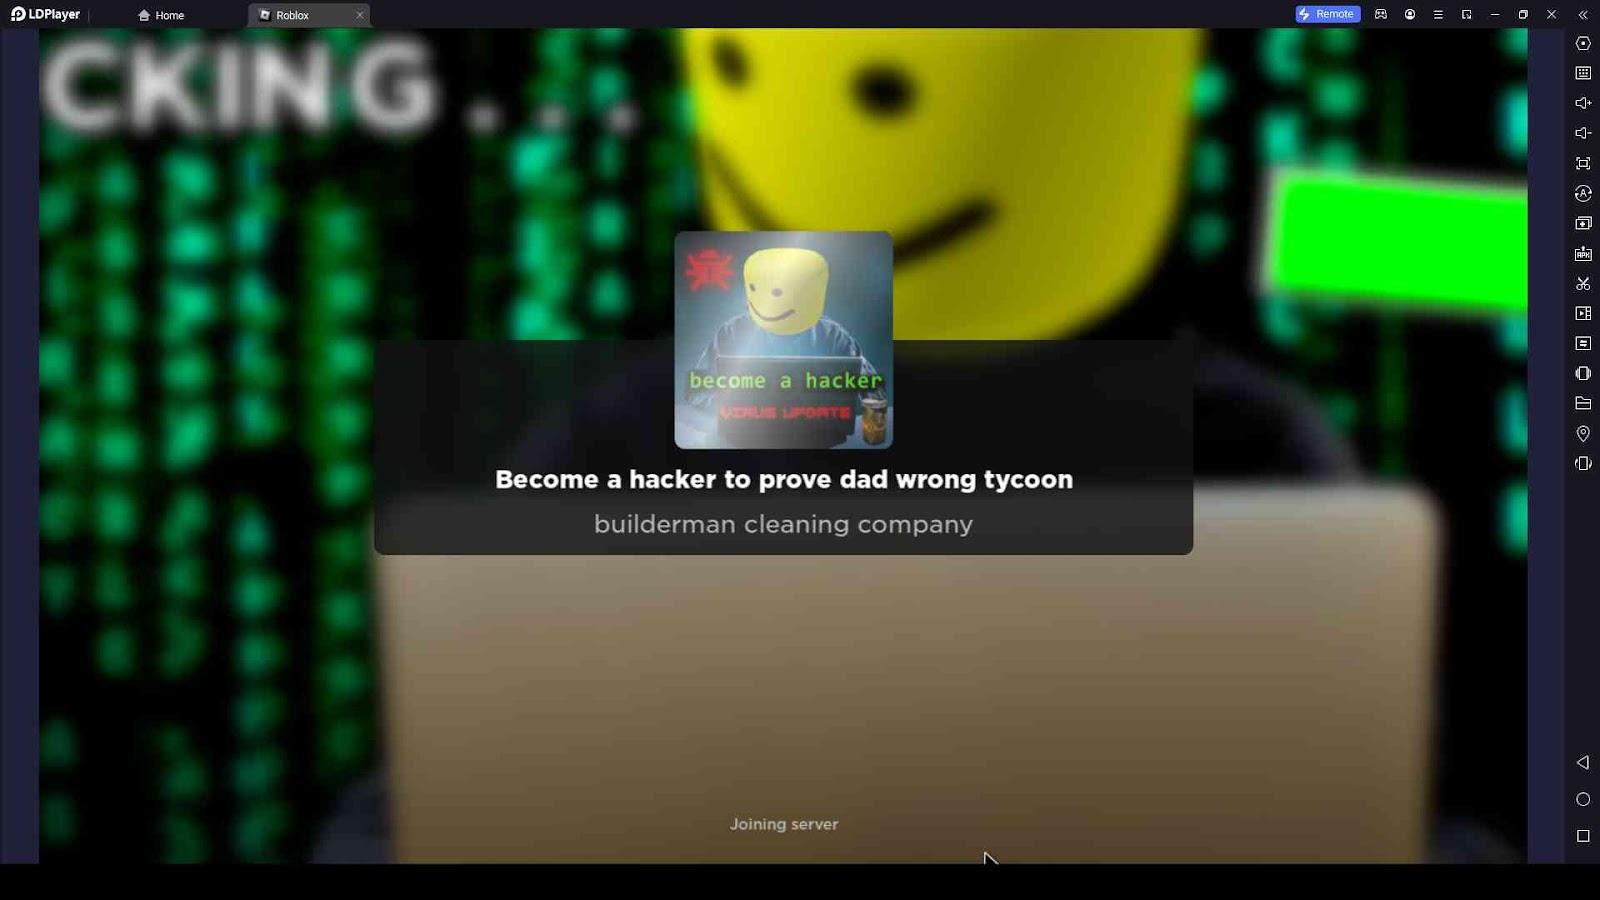 Roblox (online gaming platform) says hacker injected code the game